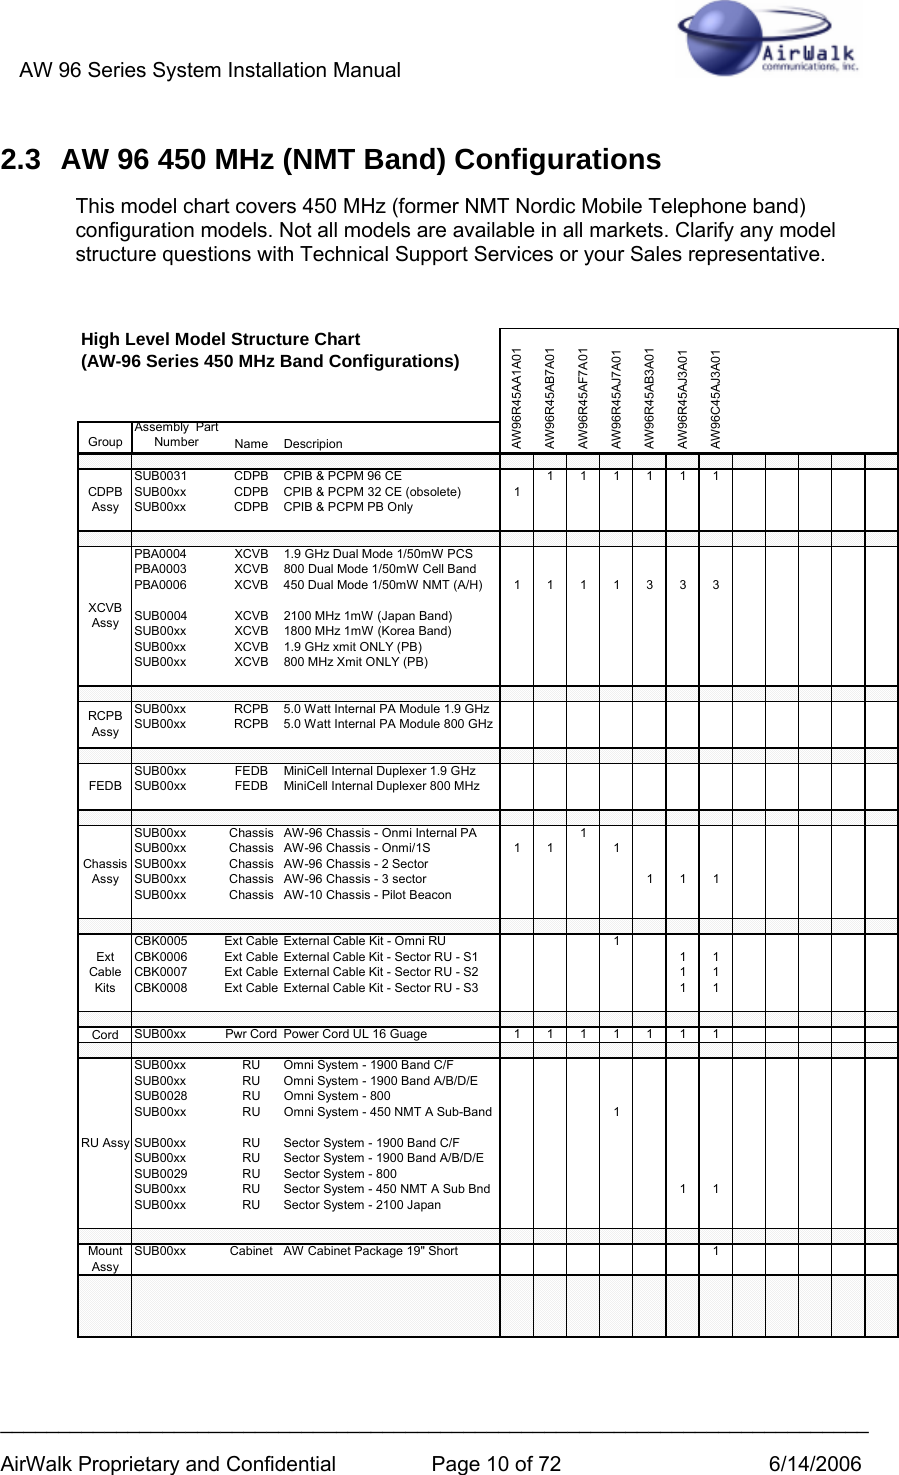 AW 96 Series System Installation Manual          ___________________________________________________________________________ AirWalk Proprietary and Confidential  Page 10 of 72  6/14/2006 2.3  AW 96 450 MHz (NMT Band) Configurations This model chart covers 450 MHz (former NMT Nordic Mobile Telephone band) configuration models. Not all models are available in all markets. Clarify any model structure questions with Technical Support Services or your Sales representative.  GroupAssembly  Part Number Name DescripionSUB0031 CDPBCPIB &amp; PCPM 96 CE 111111SUB00xx CDPB CPIB &amp; PCPM 32 CE (obsolete) 1SUB00xx CDPB CPIB &amp; PCPM PB OnlyPBA0004 XCVB 1.9 GHz Dual Mode 1/50mW PCSPBA0003 XCVB 800 Dual Mode 1/50mW Cell BandPBA0006 XCVB450 Dual Mode 1/50mW NMT (A/H) 1111333SUB0004 XCVB 2100 MHz 1mW (Japan Band)SUB00xx XCVB 1800 MHz 1mW (Korea Band)SUB00xx XCVB 1.9 GHz xmit ONLY (PB)SUB00xx XCVB 800 MHz Xmit ONLY (PB)SUB00xx RCPB 5.0 Watt Internal PA Module 1.9 GHzSUB00xx RCPB 5.0 Watt Internal PA Module 800 GHzSUB00xx FEDB MiniCell Internal Duplexer 1.9 GHzSUB00xx FEDB MiniCell Internal Duplexer 800 MHzSUB00xx Chassis AW-96 Chassis - Onmi Internal PA 1SUB00xx Chassis AW-96 Chassis - Onmi/1S 1 1 1SUB00xx Chassis AW-96 Chassis - 2 SectorSUB00xx Chassis AW-96 Chassis - 3 sector 1 1 1SUB00xx Chassis AW-10 Chassis - Pilot BeaconCBK0005 Ext Cable External Cable Kit - Omni RU 1CBK0006 Ext Cable External Cable Kit - Sector RU - S1 1 1CBK0007 Ext Cable External Cable Kit - Sector RU - S2 1 1CBK0008 Ext Cable External Cable Kit - Sector RU - S3 1 1Cord SUB00xx Pwr CordPower Cord UL 16 Guage 1111111SUB00xx RU Omni System - 1900 Band C/FSUB00xx RU Omni System - 1900 Band A/B/D/ESUB0028 RU Omni System - 800SUB00xx RU Omni System - 450 NMT A Sub-Band 1SUB00xx RU Sector System - 1900 Band C/FSUB00xx RU Sector System - 1900 Band A/B/D/ESUB0029 RU Sector System - 800SUB00xx RU Sector System - 450 NMT A Sub Bnd 1 1SUB00xx RU Sector System - 2100 JapanSUB00xx Cabinet AW Cabinet Package 19&quot; Short 1XCVB AssyHigh Level Model Structure Chart                            (AW-96 Series 450 MHz Band Configurations)AW96R45AB3A01AW96R45AJ3A01AW96C45AJ3A01AW96R45AA1A01AW96R45AB7A01AW96R45AF7A01AW96R45AJ7A01Mount AssyExt Cable KitsRCPB AssyChassis AssyRU AssyFEDBCDPB Assy  